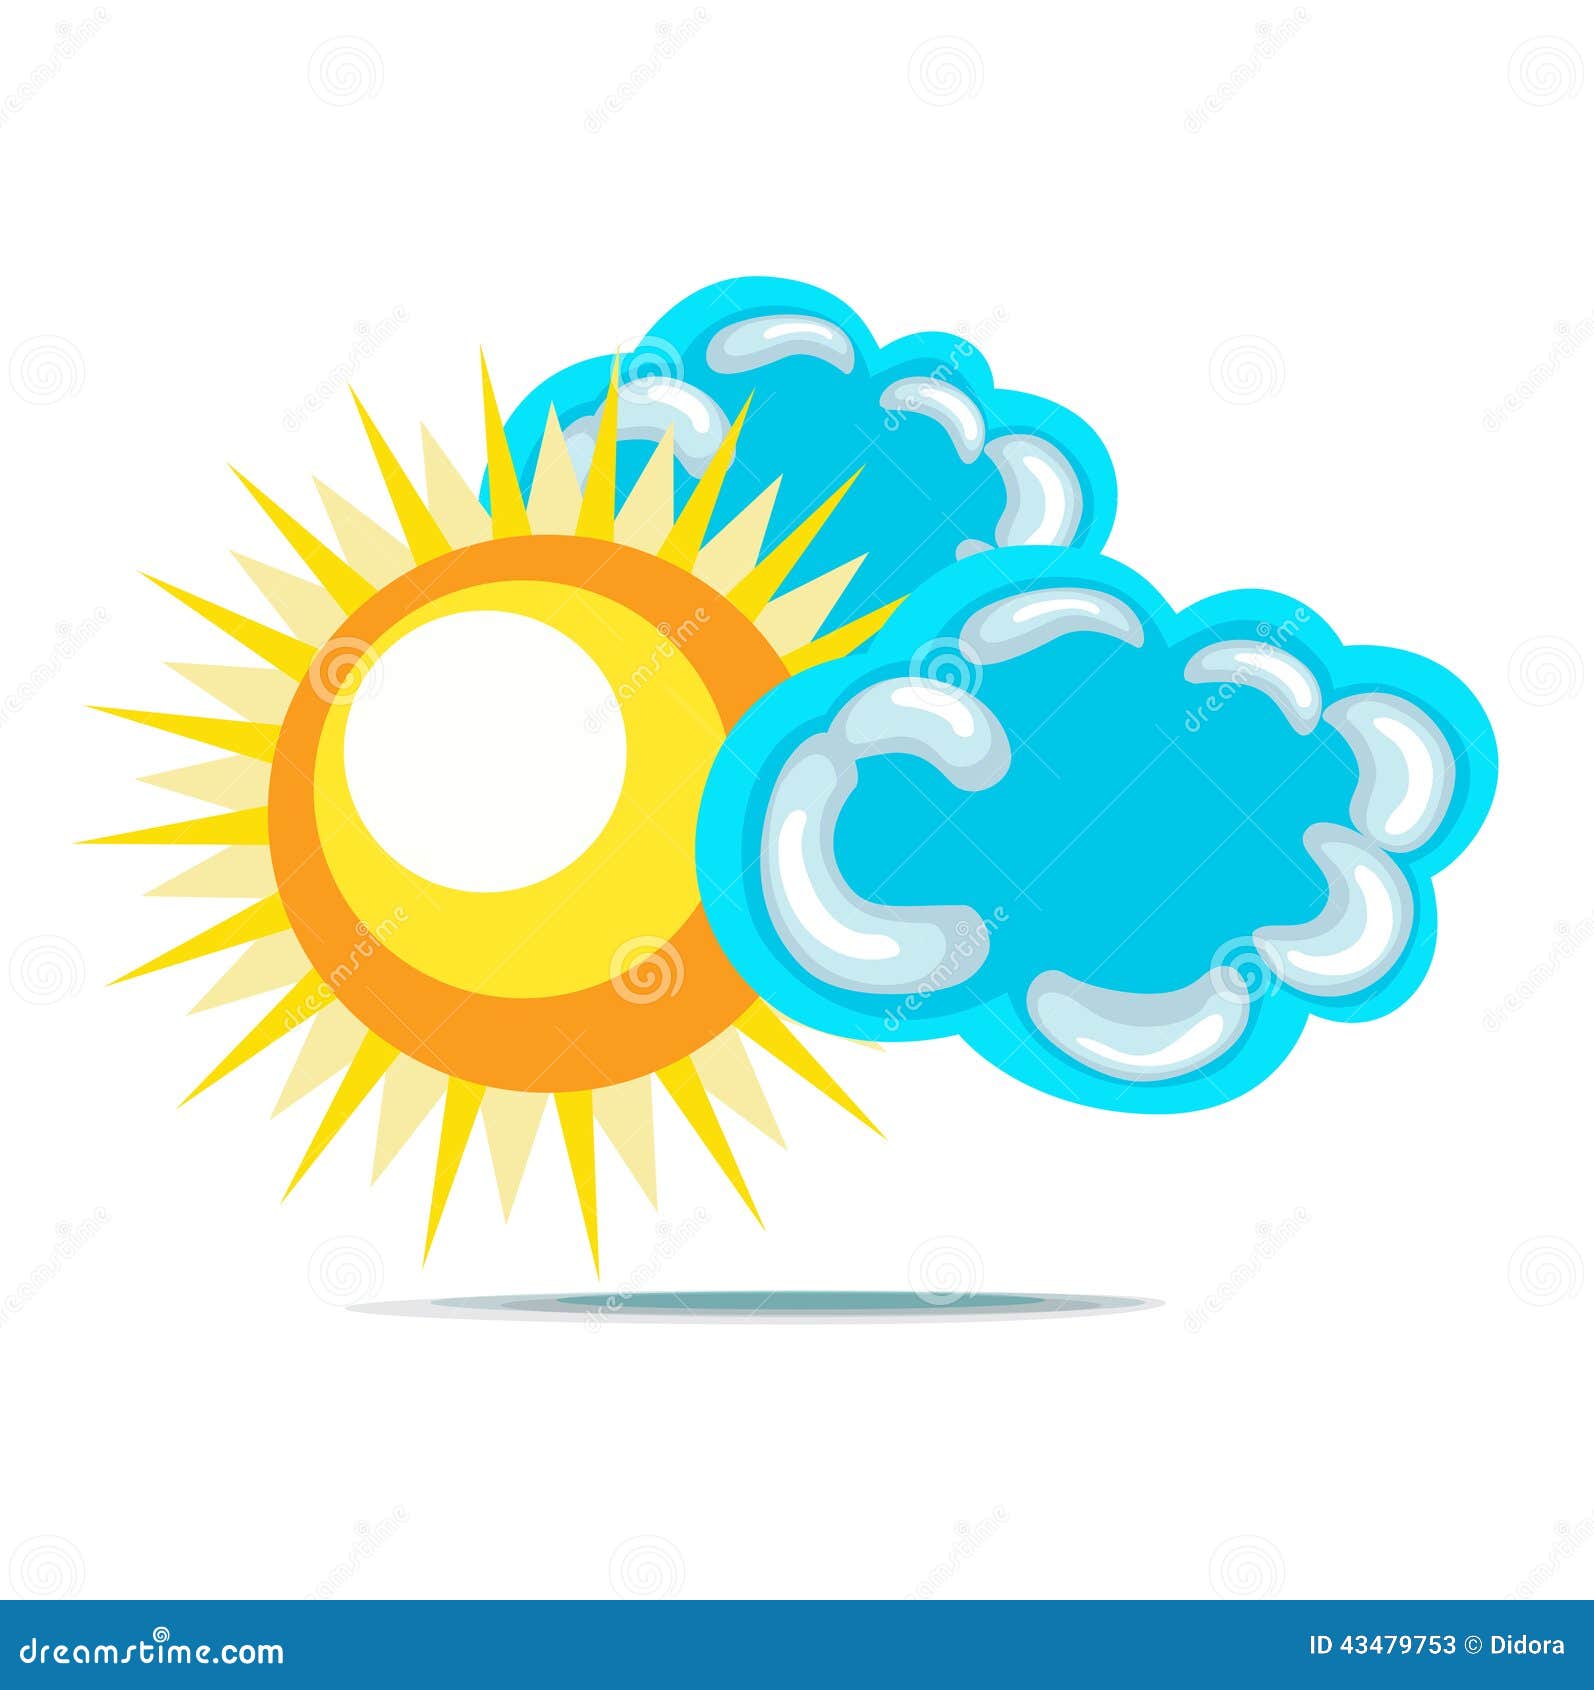 Sun and clouds flat design stock vector. Illustration of blue - 43479753